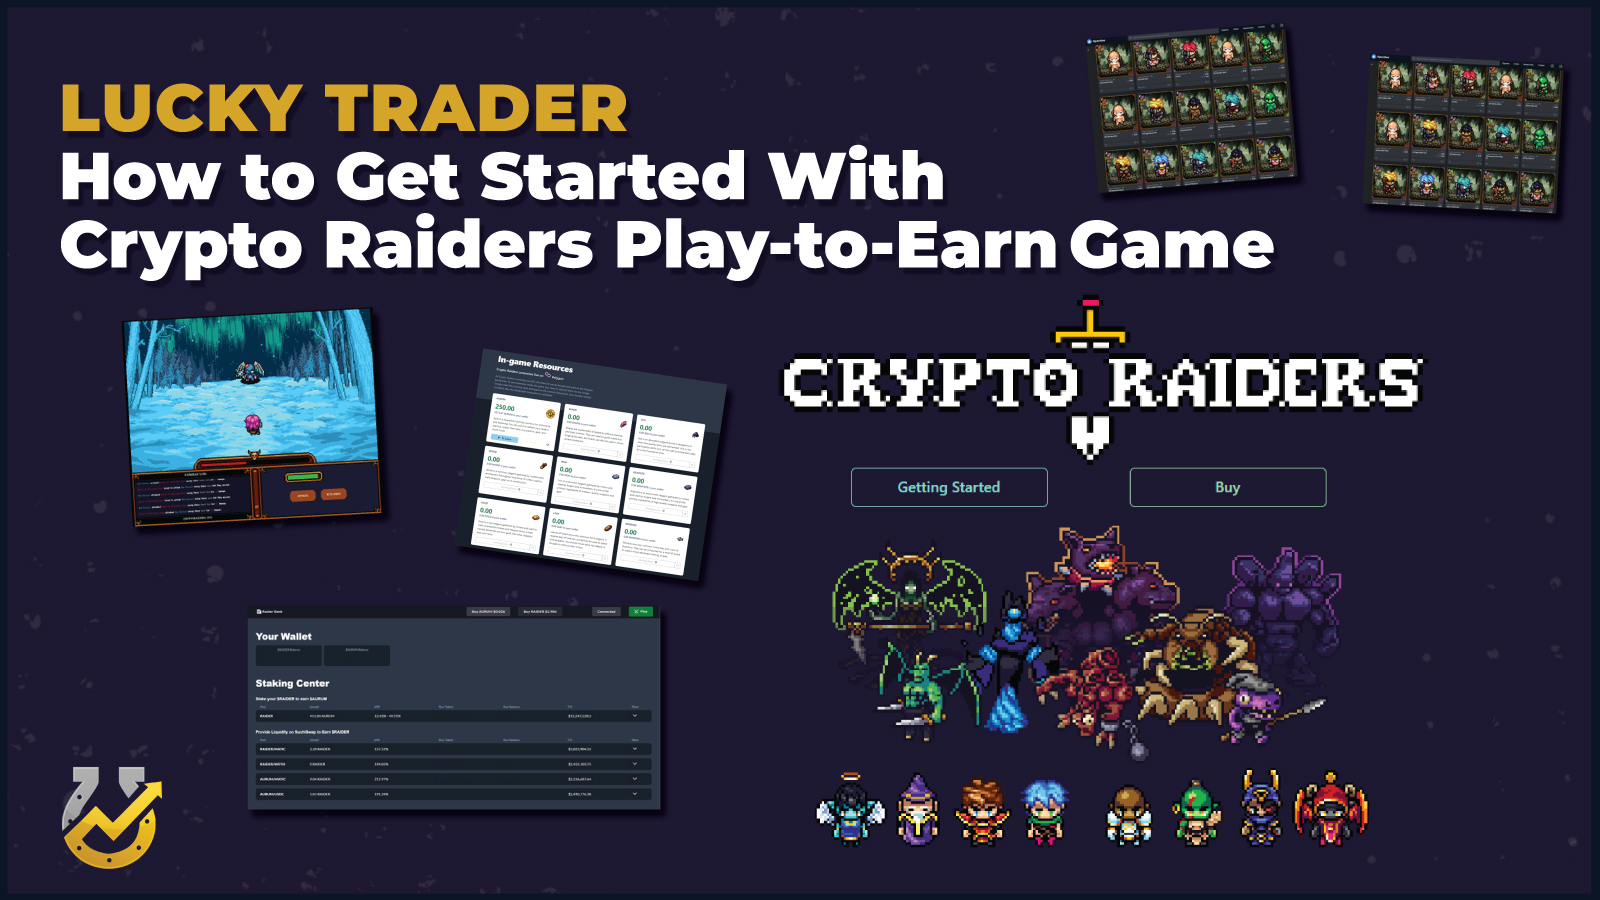 How to Get Started With Crypto Raiders Play-to-Earn Game